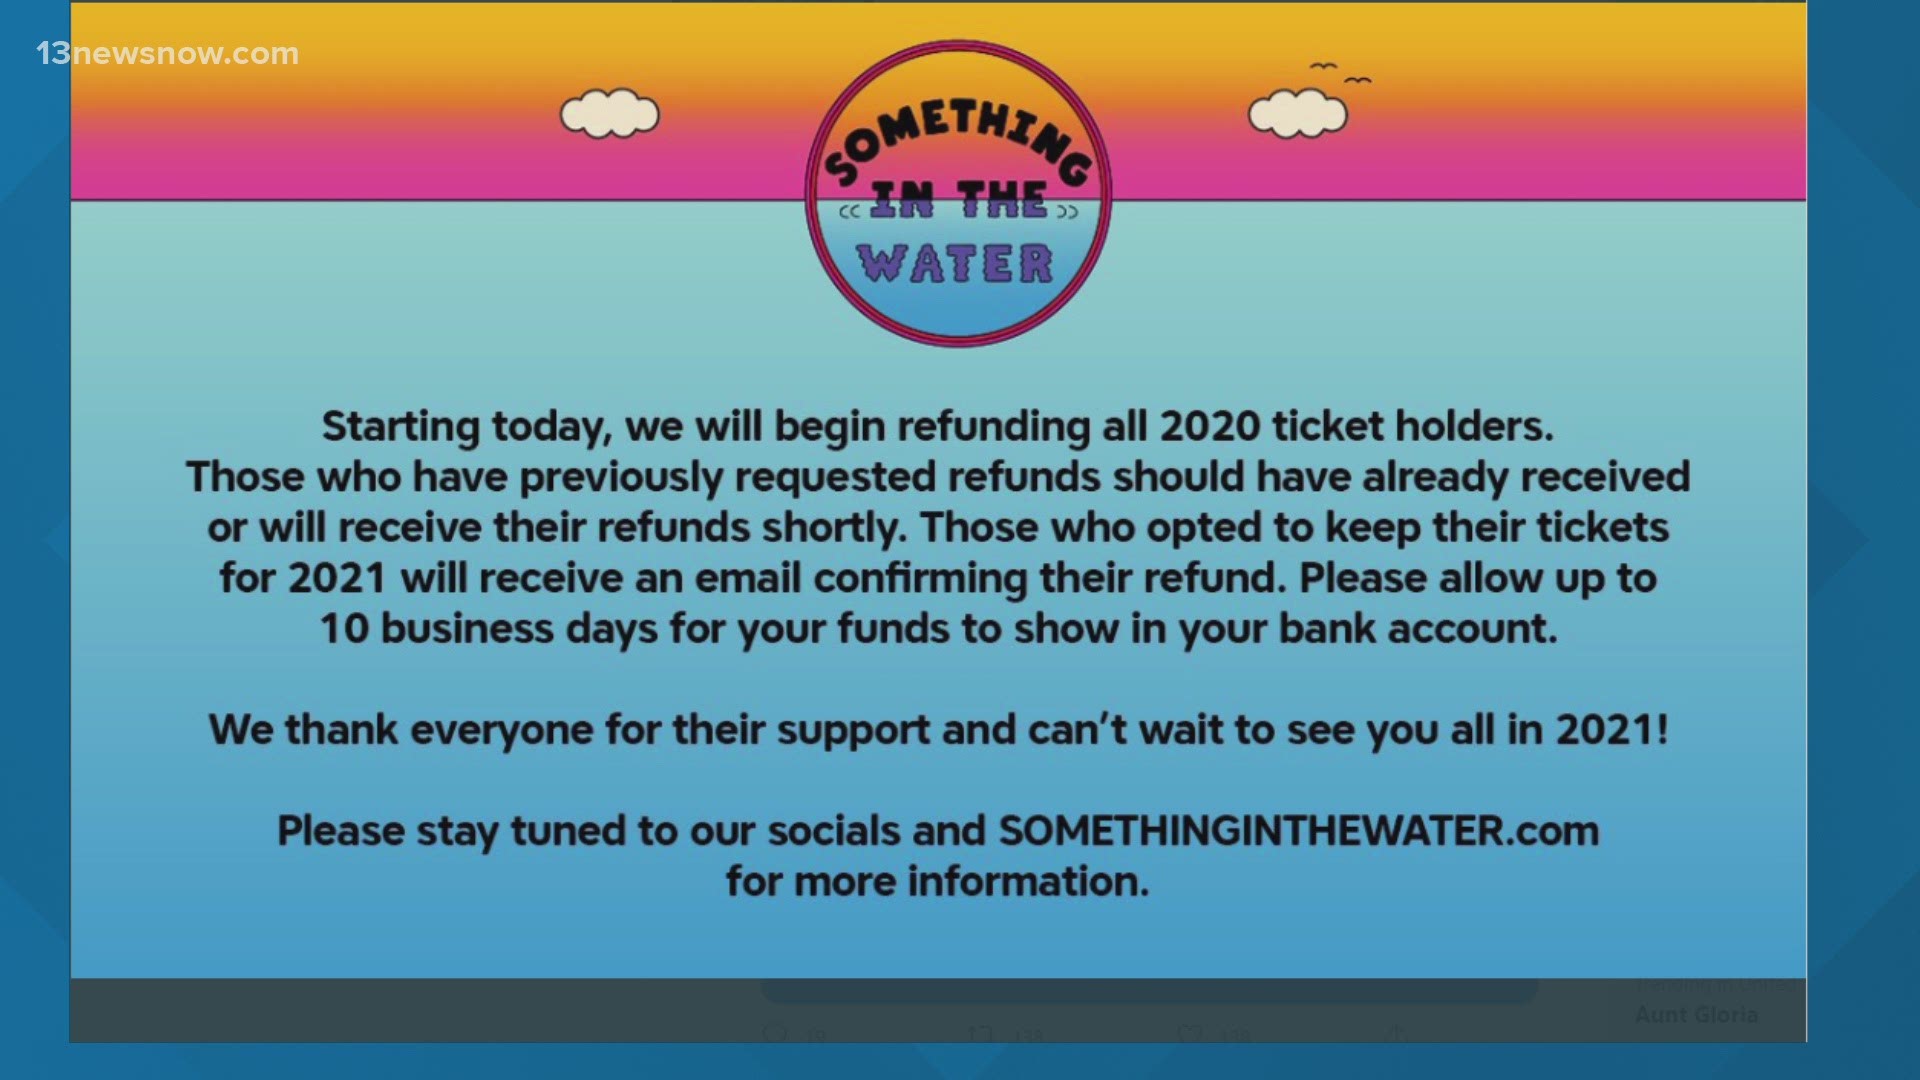 People with the festival said they'd refund money to anyone who planned to use a 2020 ticket in 2021. The event was canceled because of the coronavirus pandemic.